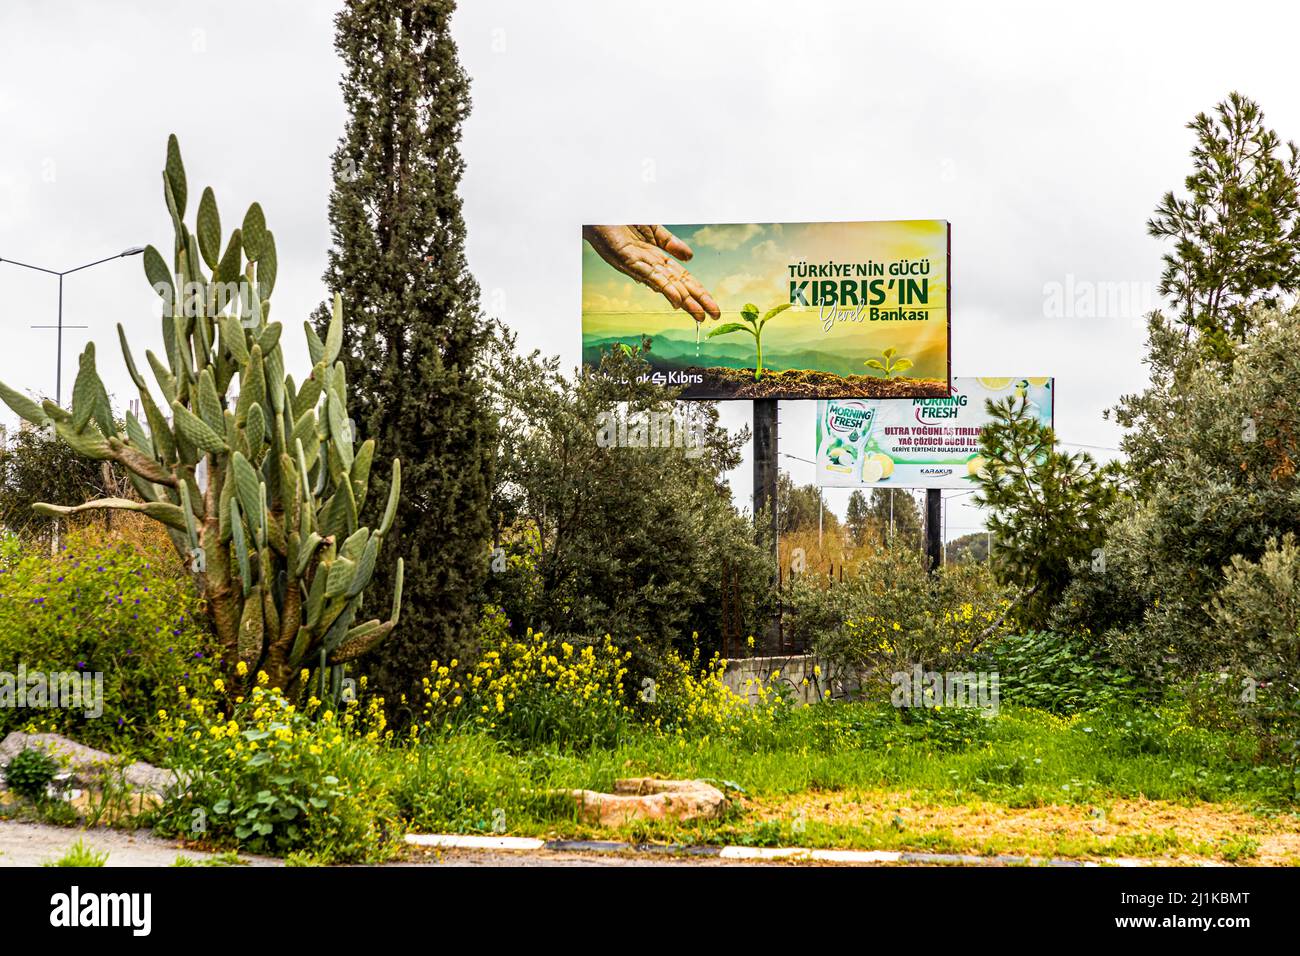 Billboards in an industrial area of the Turkish Republic of Northern Cyprus (TRNC) Stock Photo